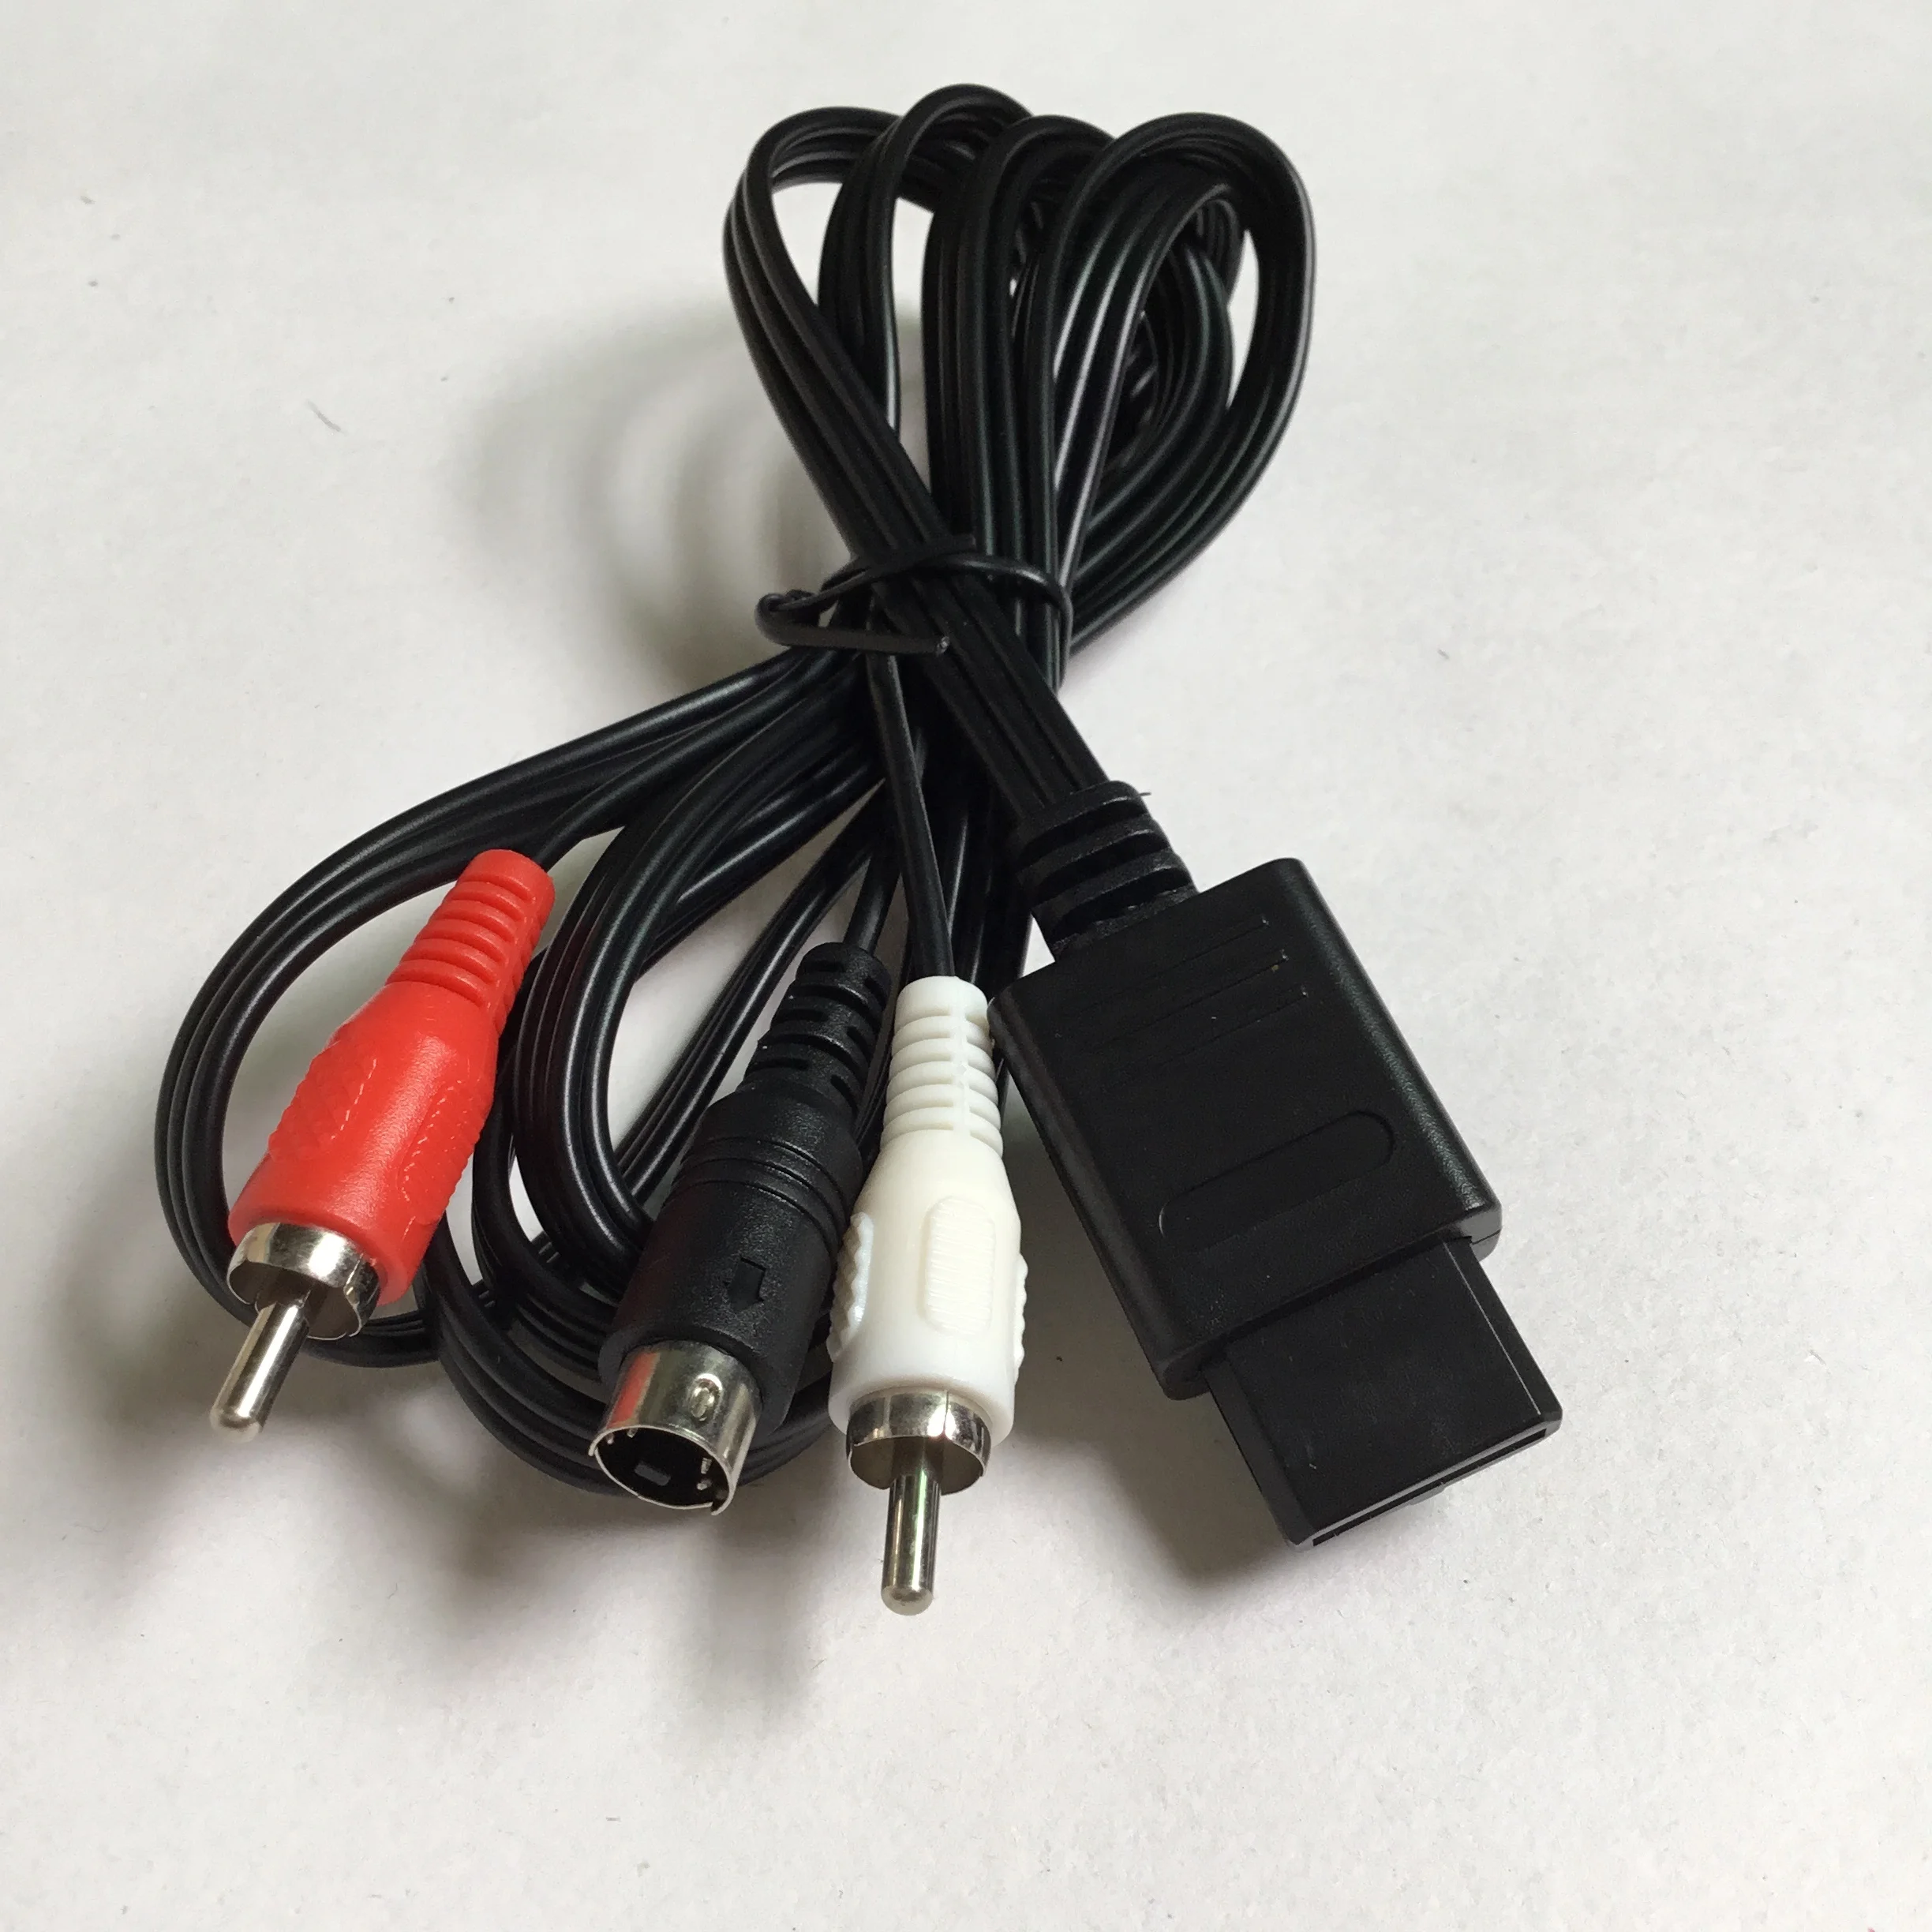 nintendo 64 video cable